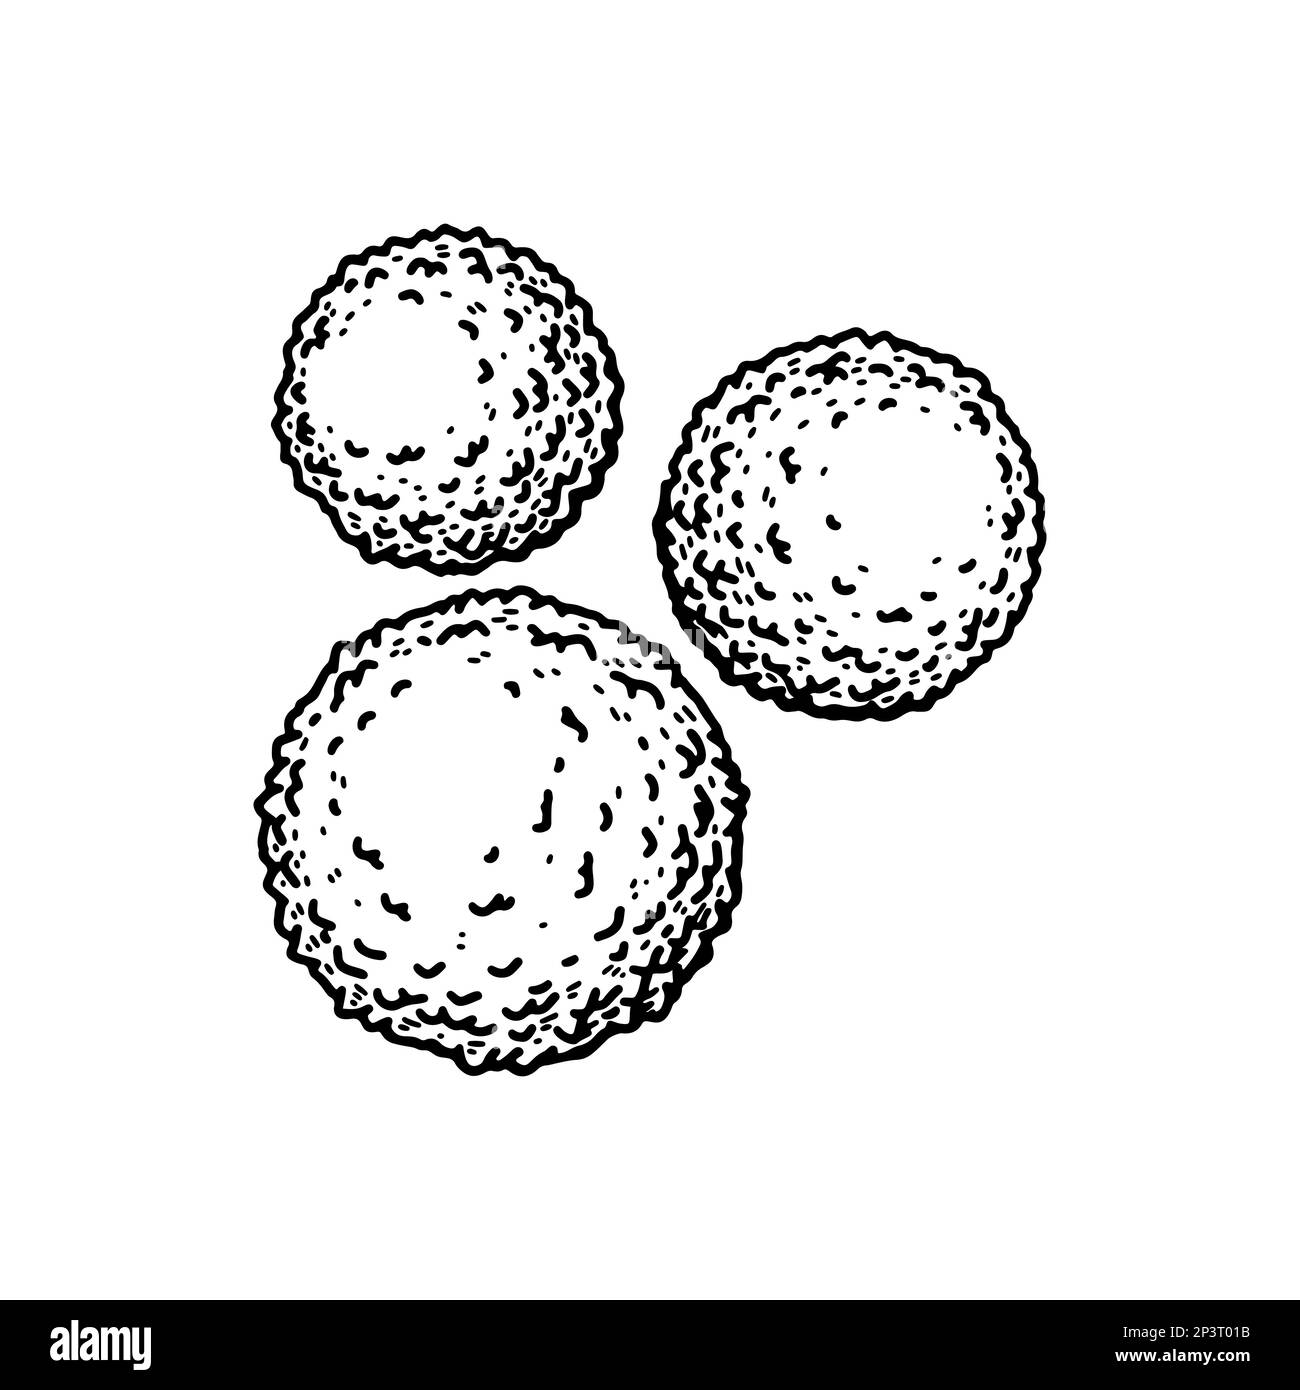 Leukocyte white blood cells isolated on white background. Hand drawn scientific microbiology vector illustration in sketch style Stock Vector